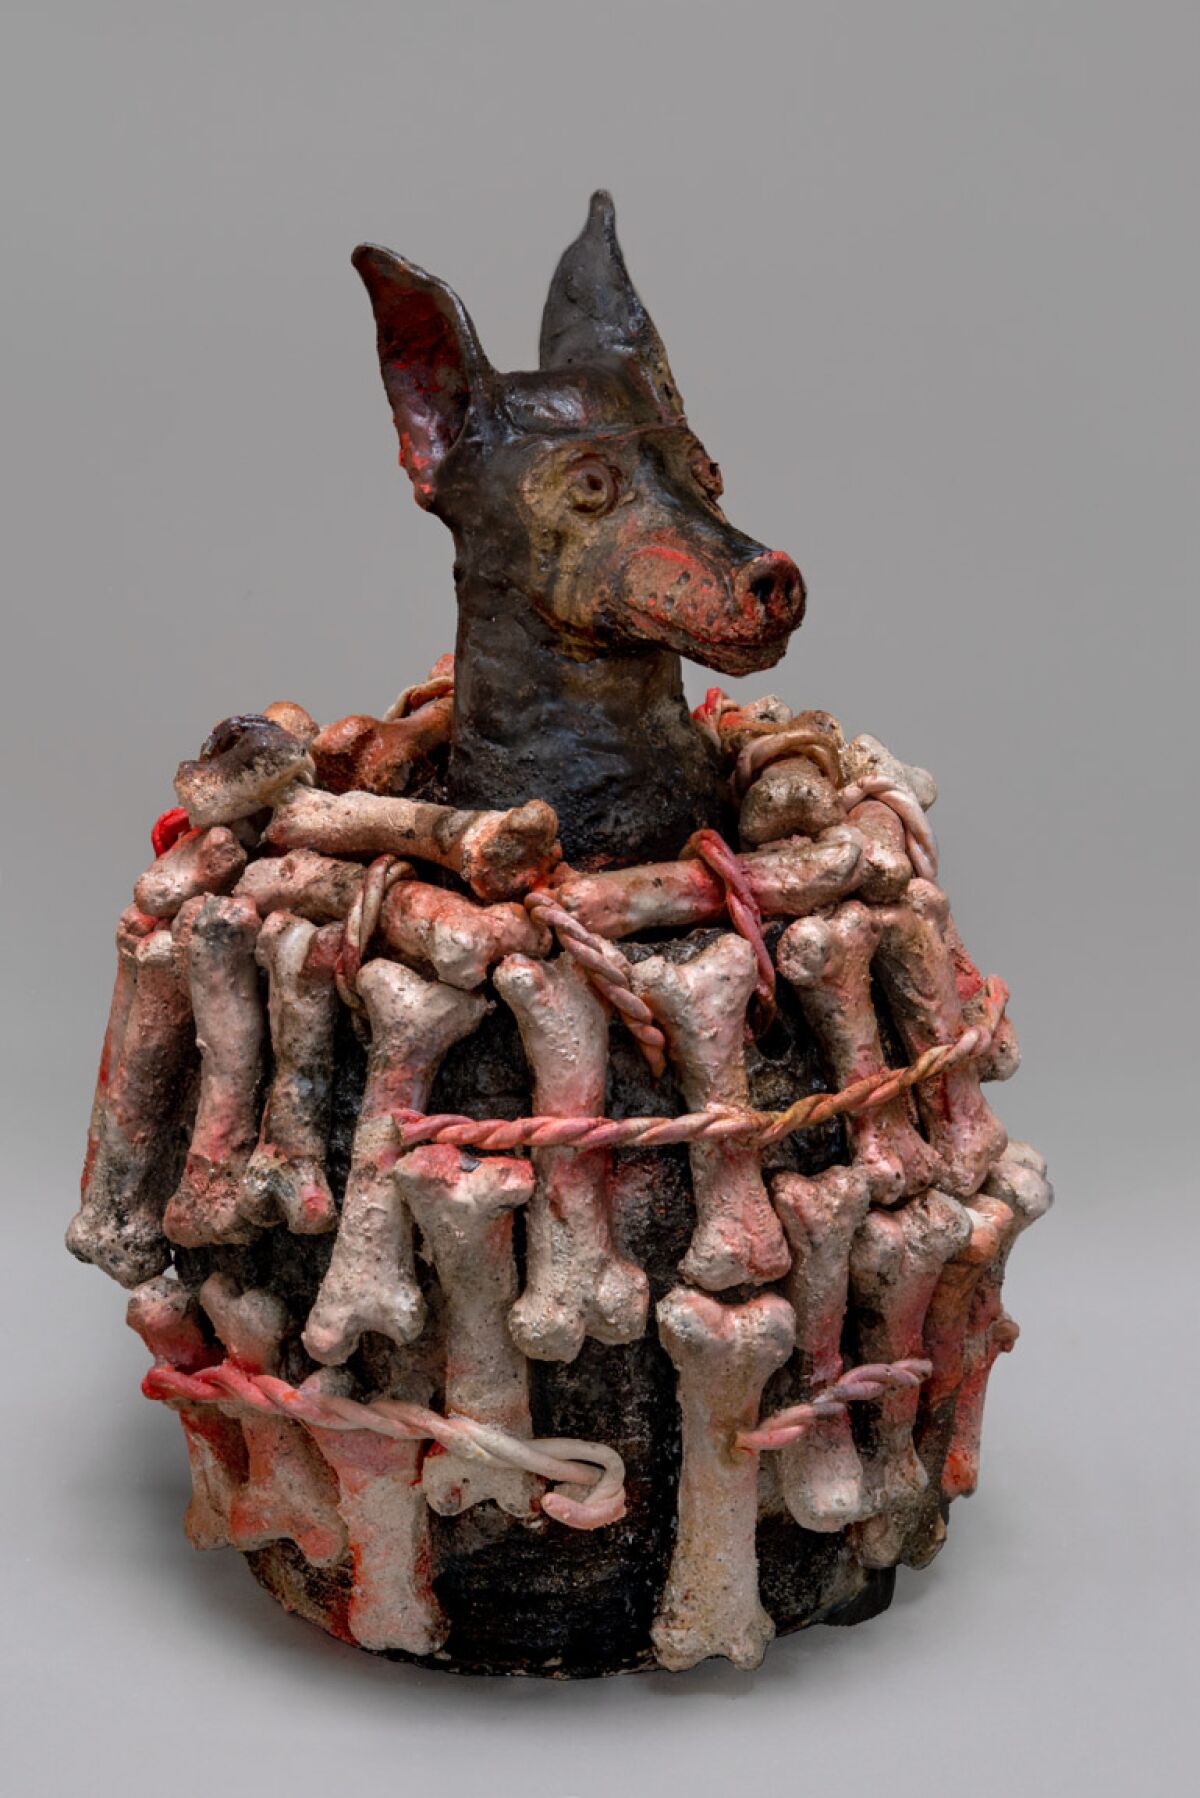 "Perro con huesos," 2015, by Francisco Toledo, part of a solo show devoted to the sculptures of the late Oaxacan painter.